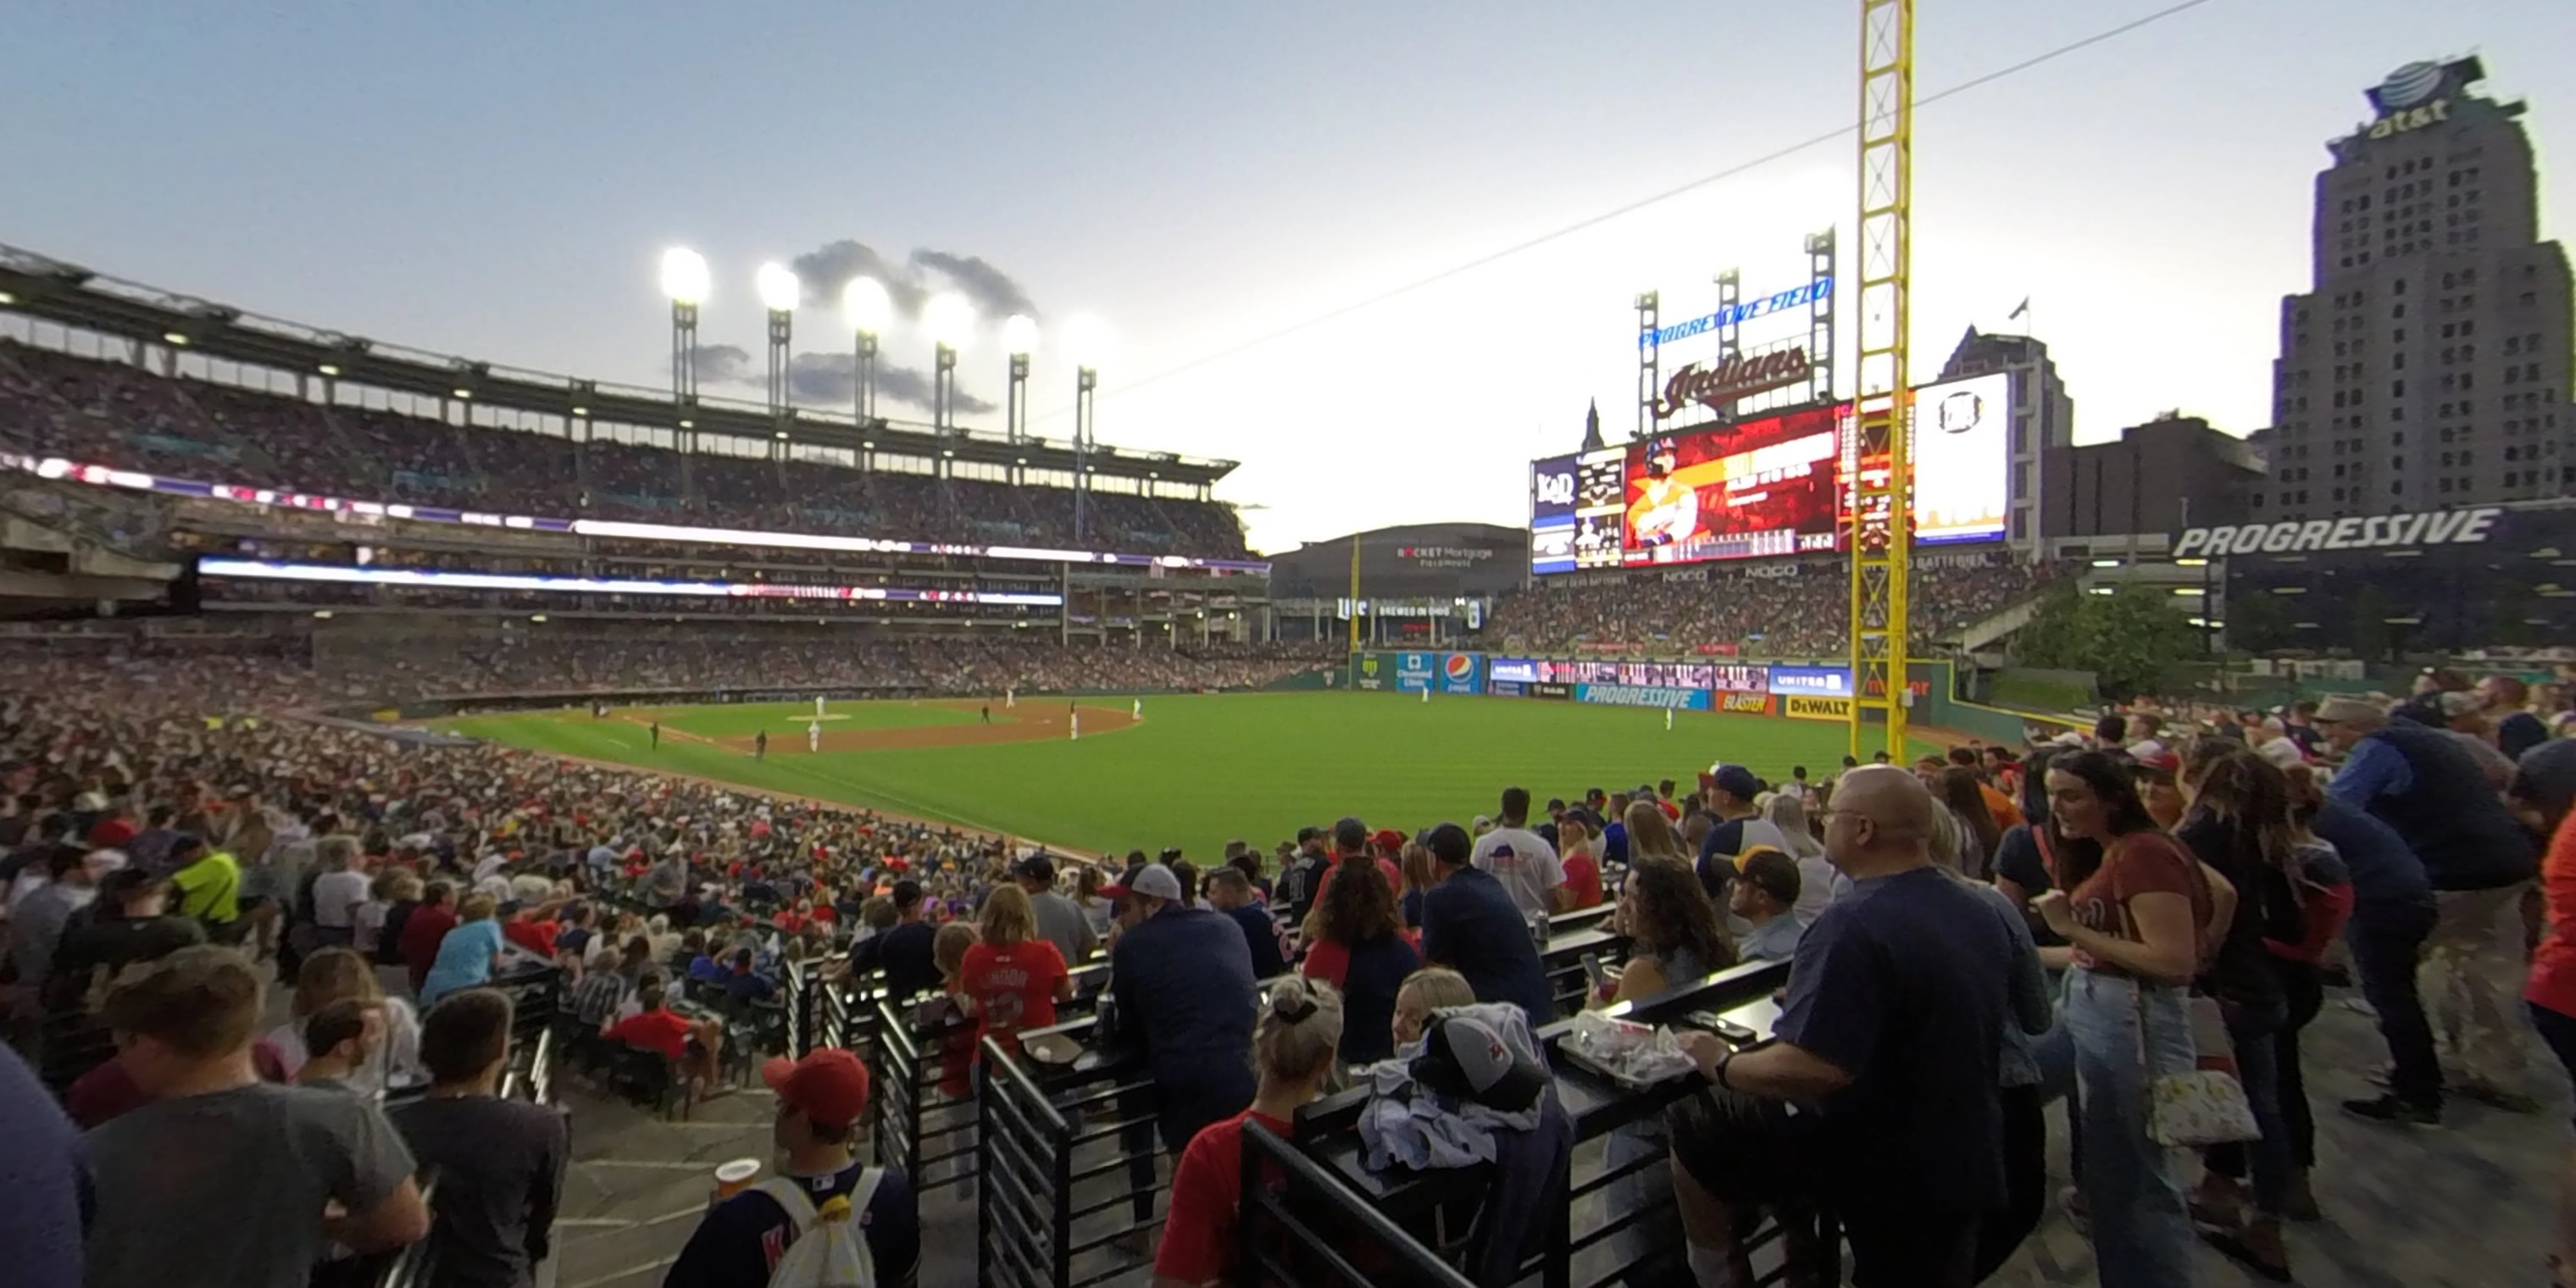 section 117 panoramic seat view  - progressive field